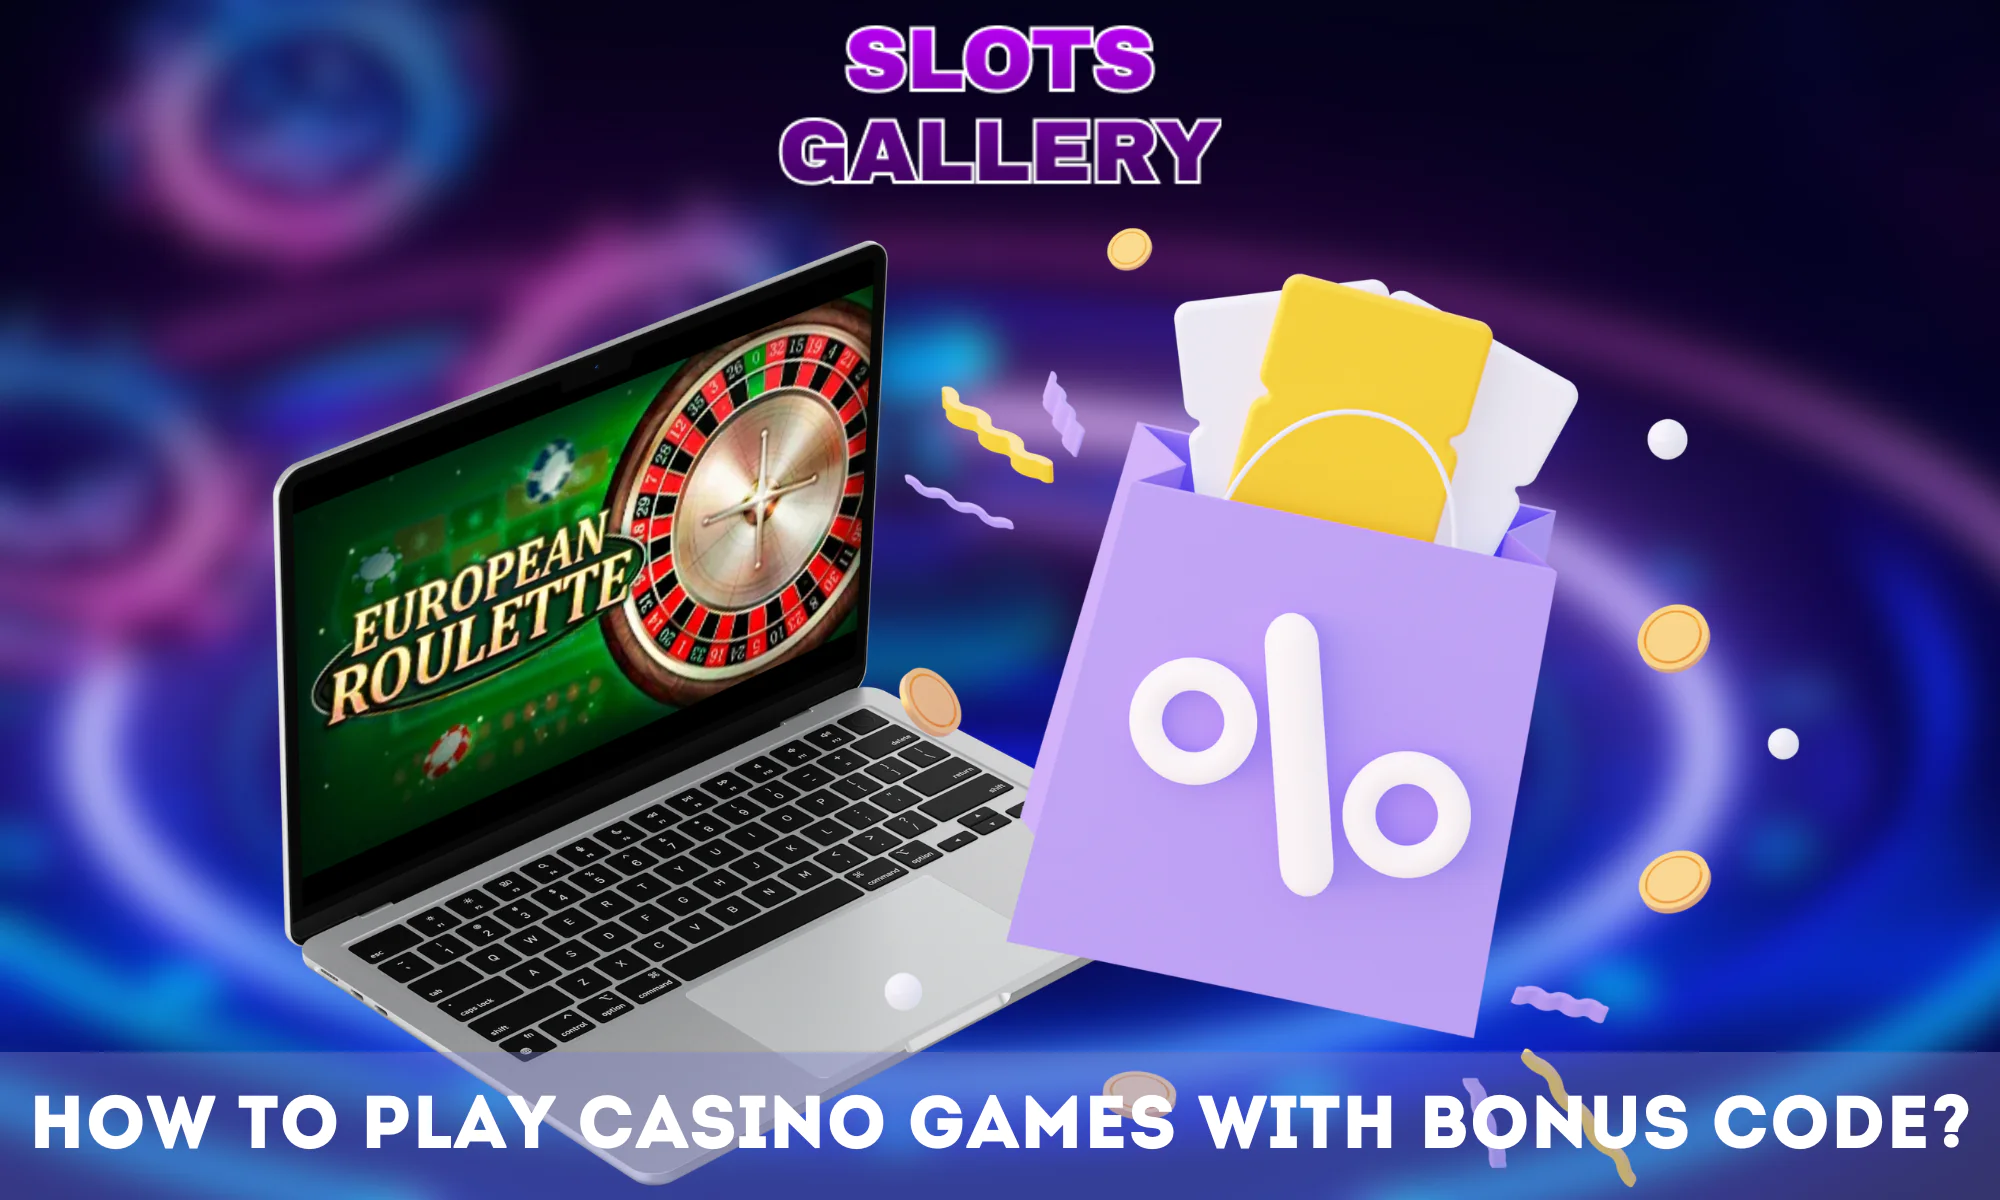 Instructions on how to play games with a promo code from Slots Gallery